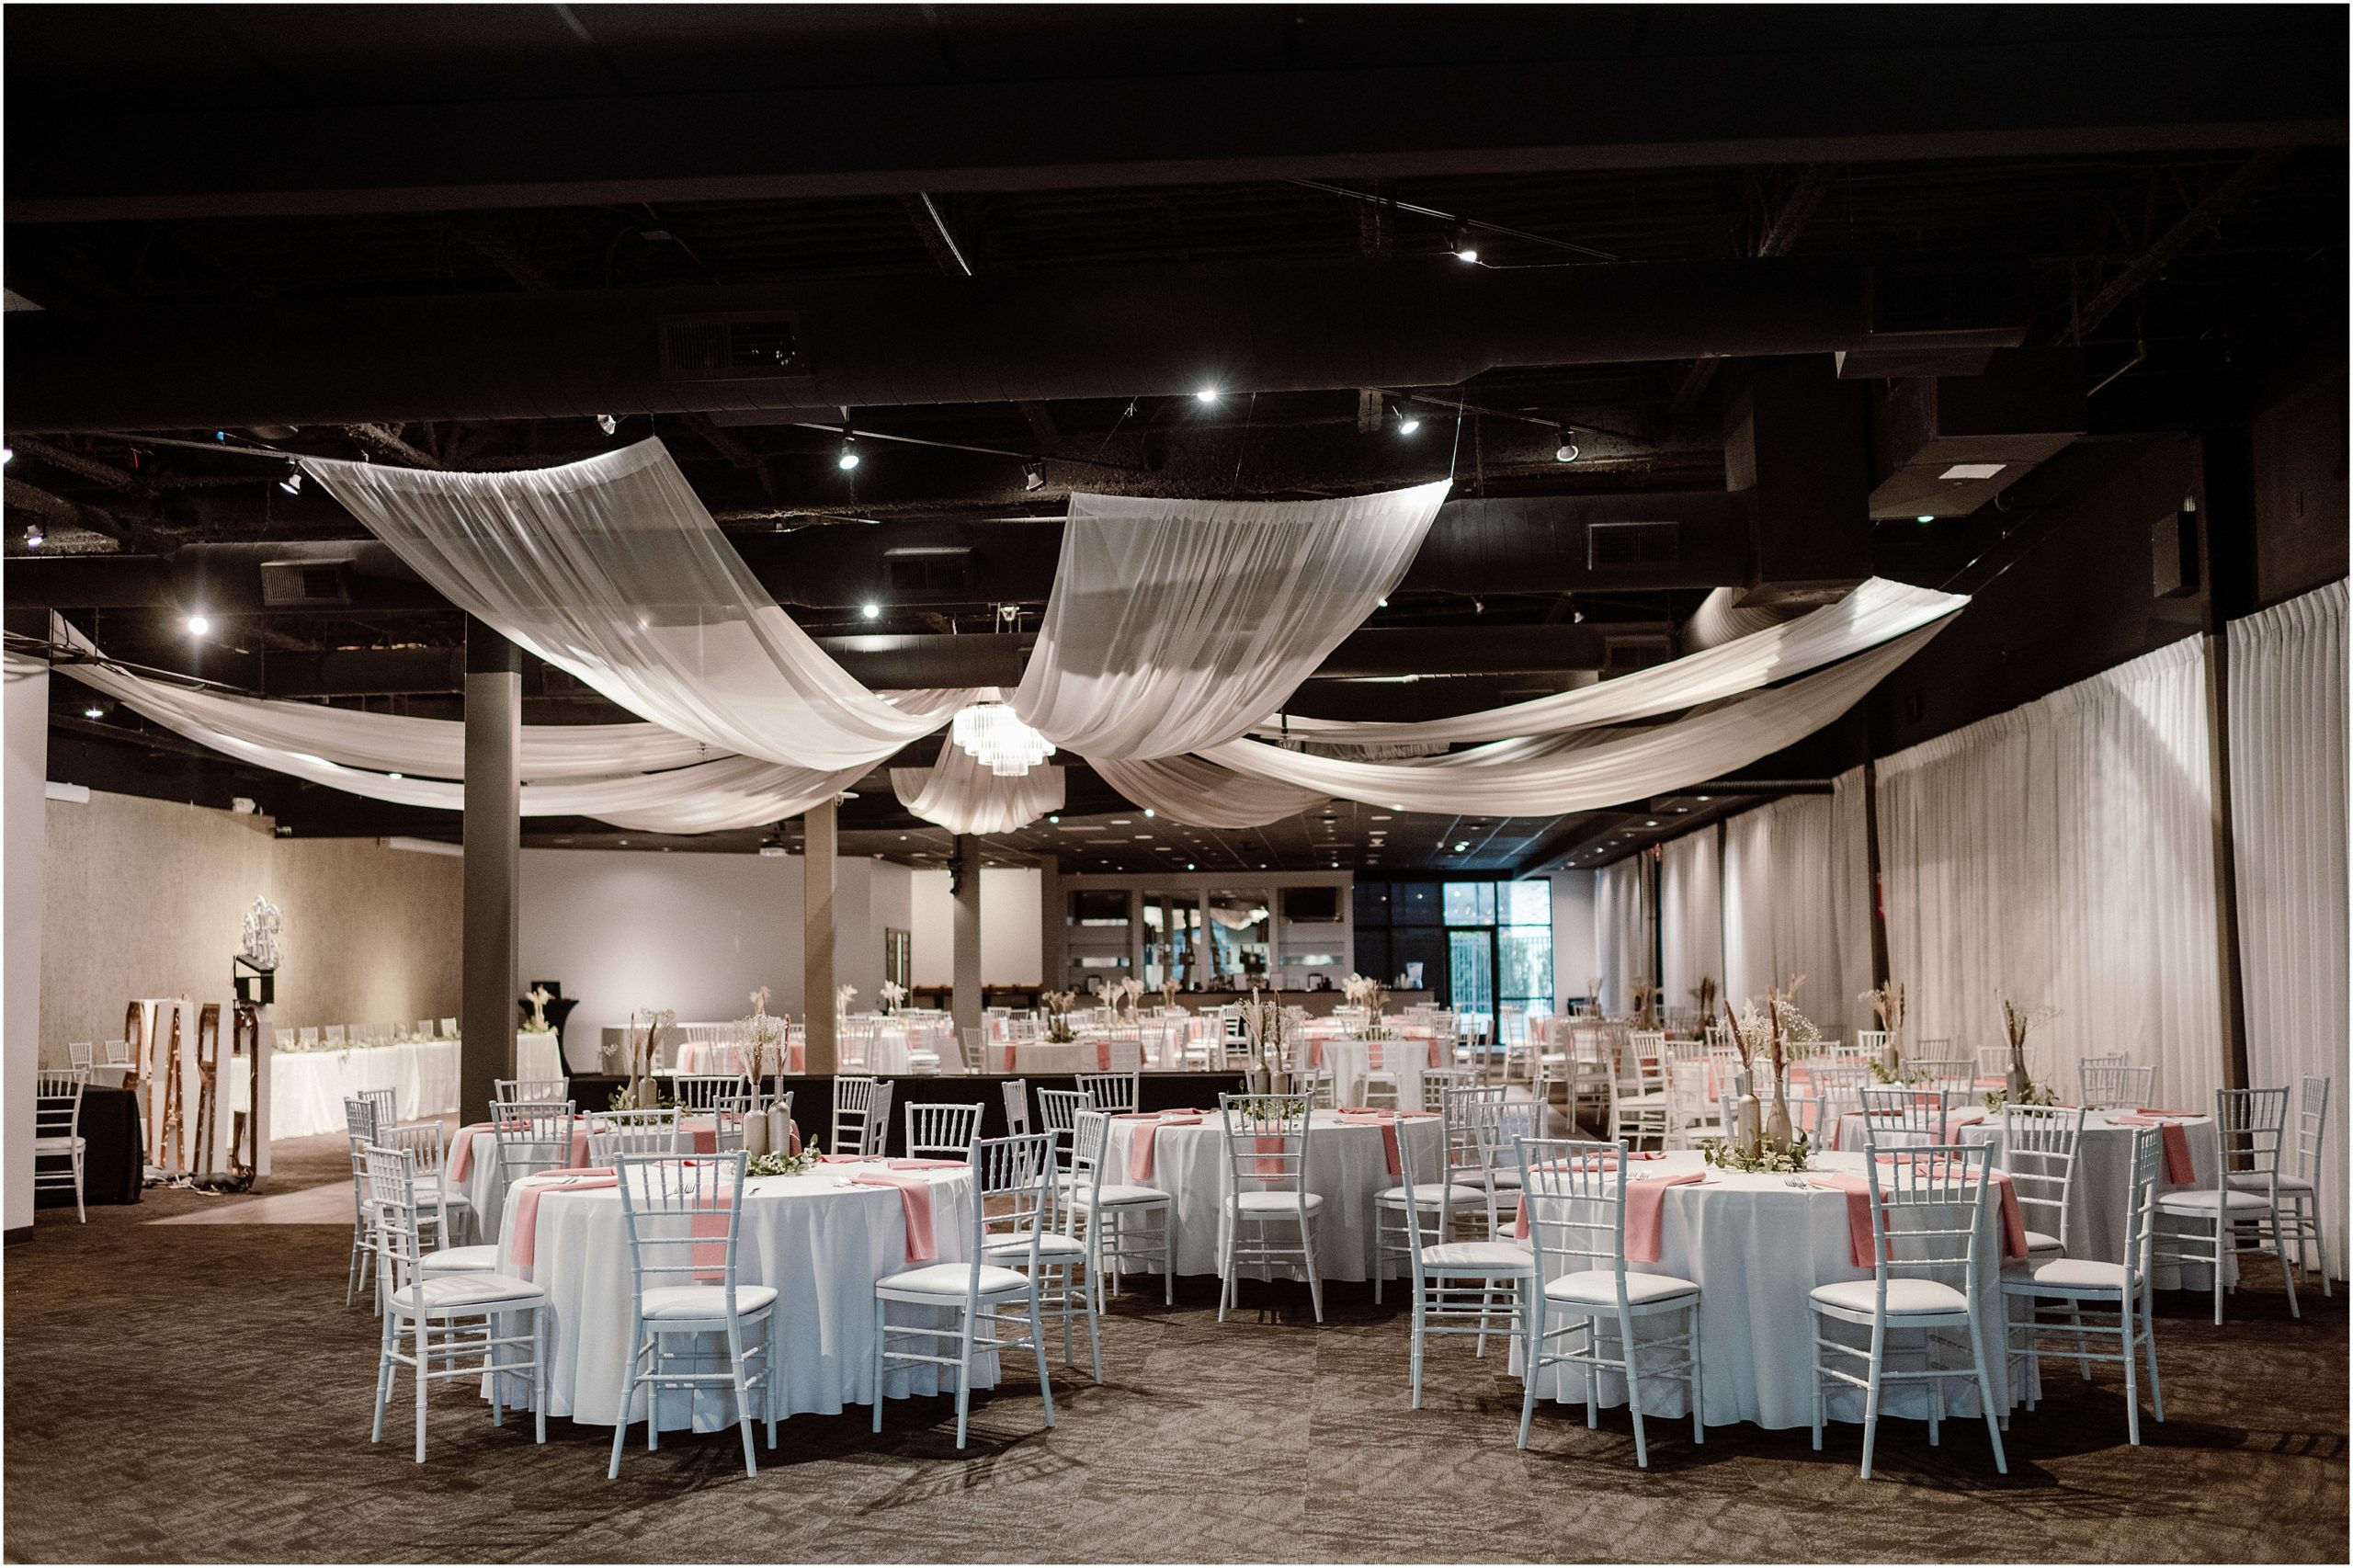 A wide view of The Soiree Room in Omaha, showing all the white tables and chairs with pink accents. Taken by Omaha NE Wedding Photographer, Anna Brace